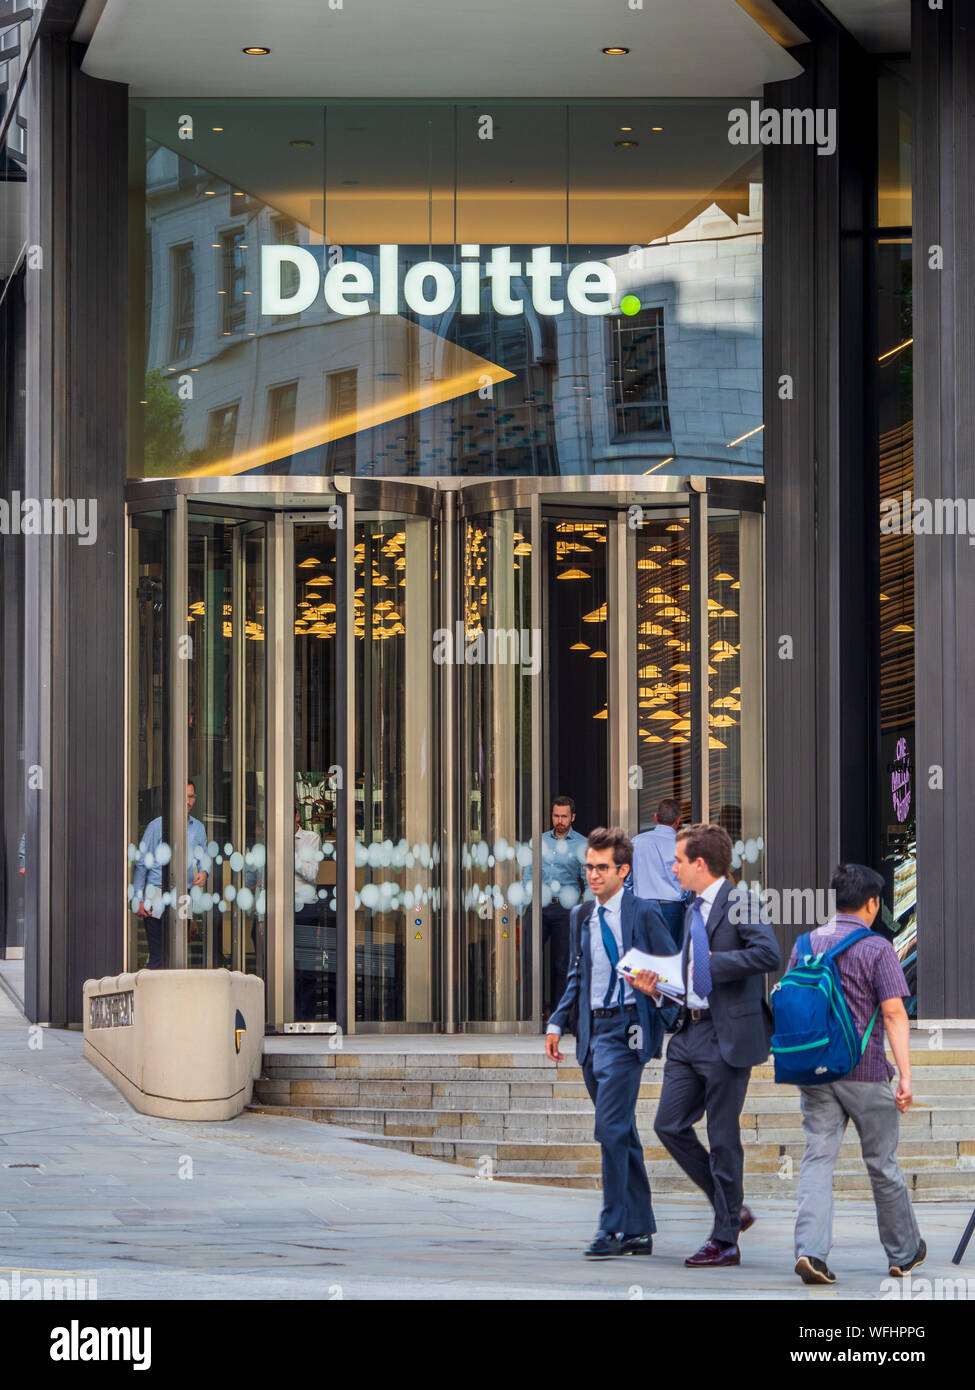 Deloitte HQ London. Deloitte UK and North West Europe headquarters at 1 New Street Square Central London. Deloitte Touche Tohmatsu Limited London HQ. Stock Photo